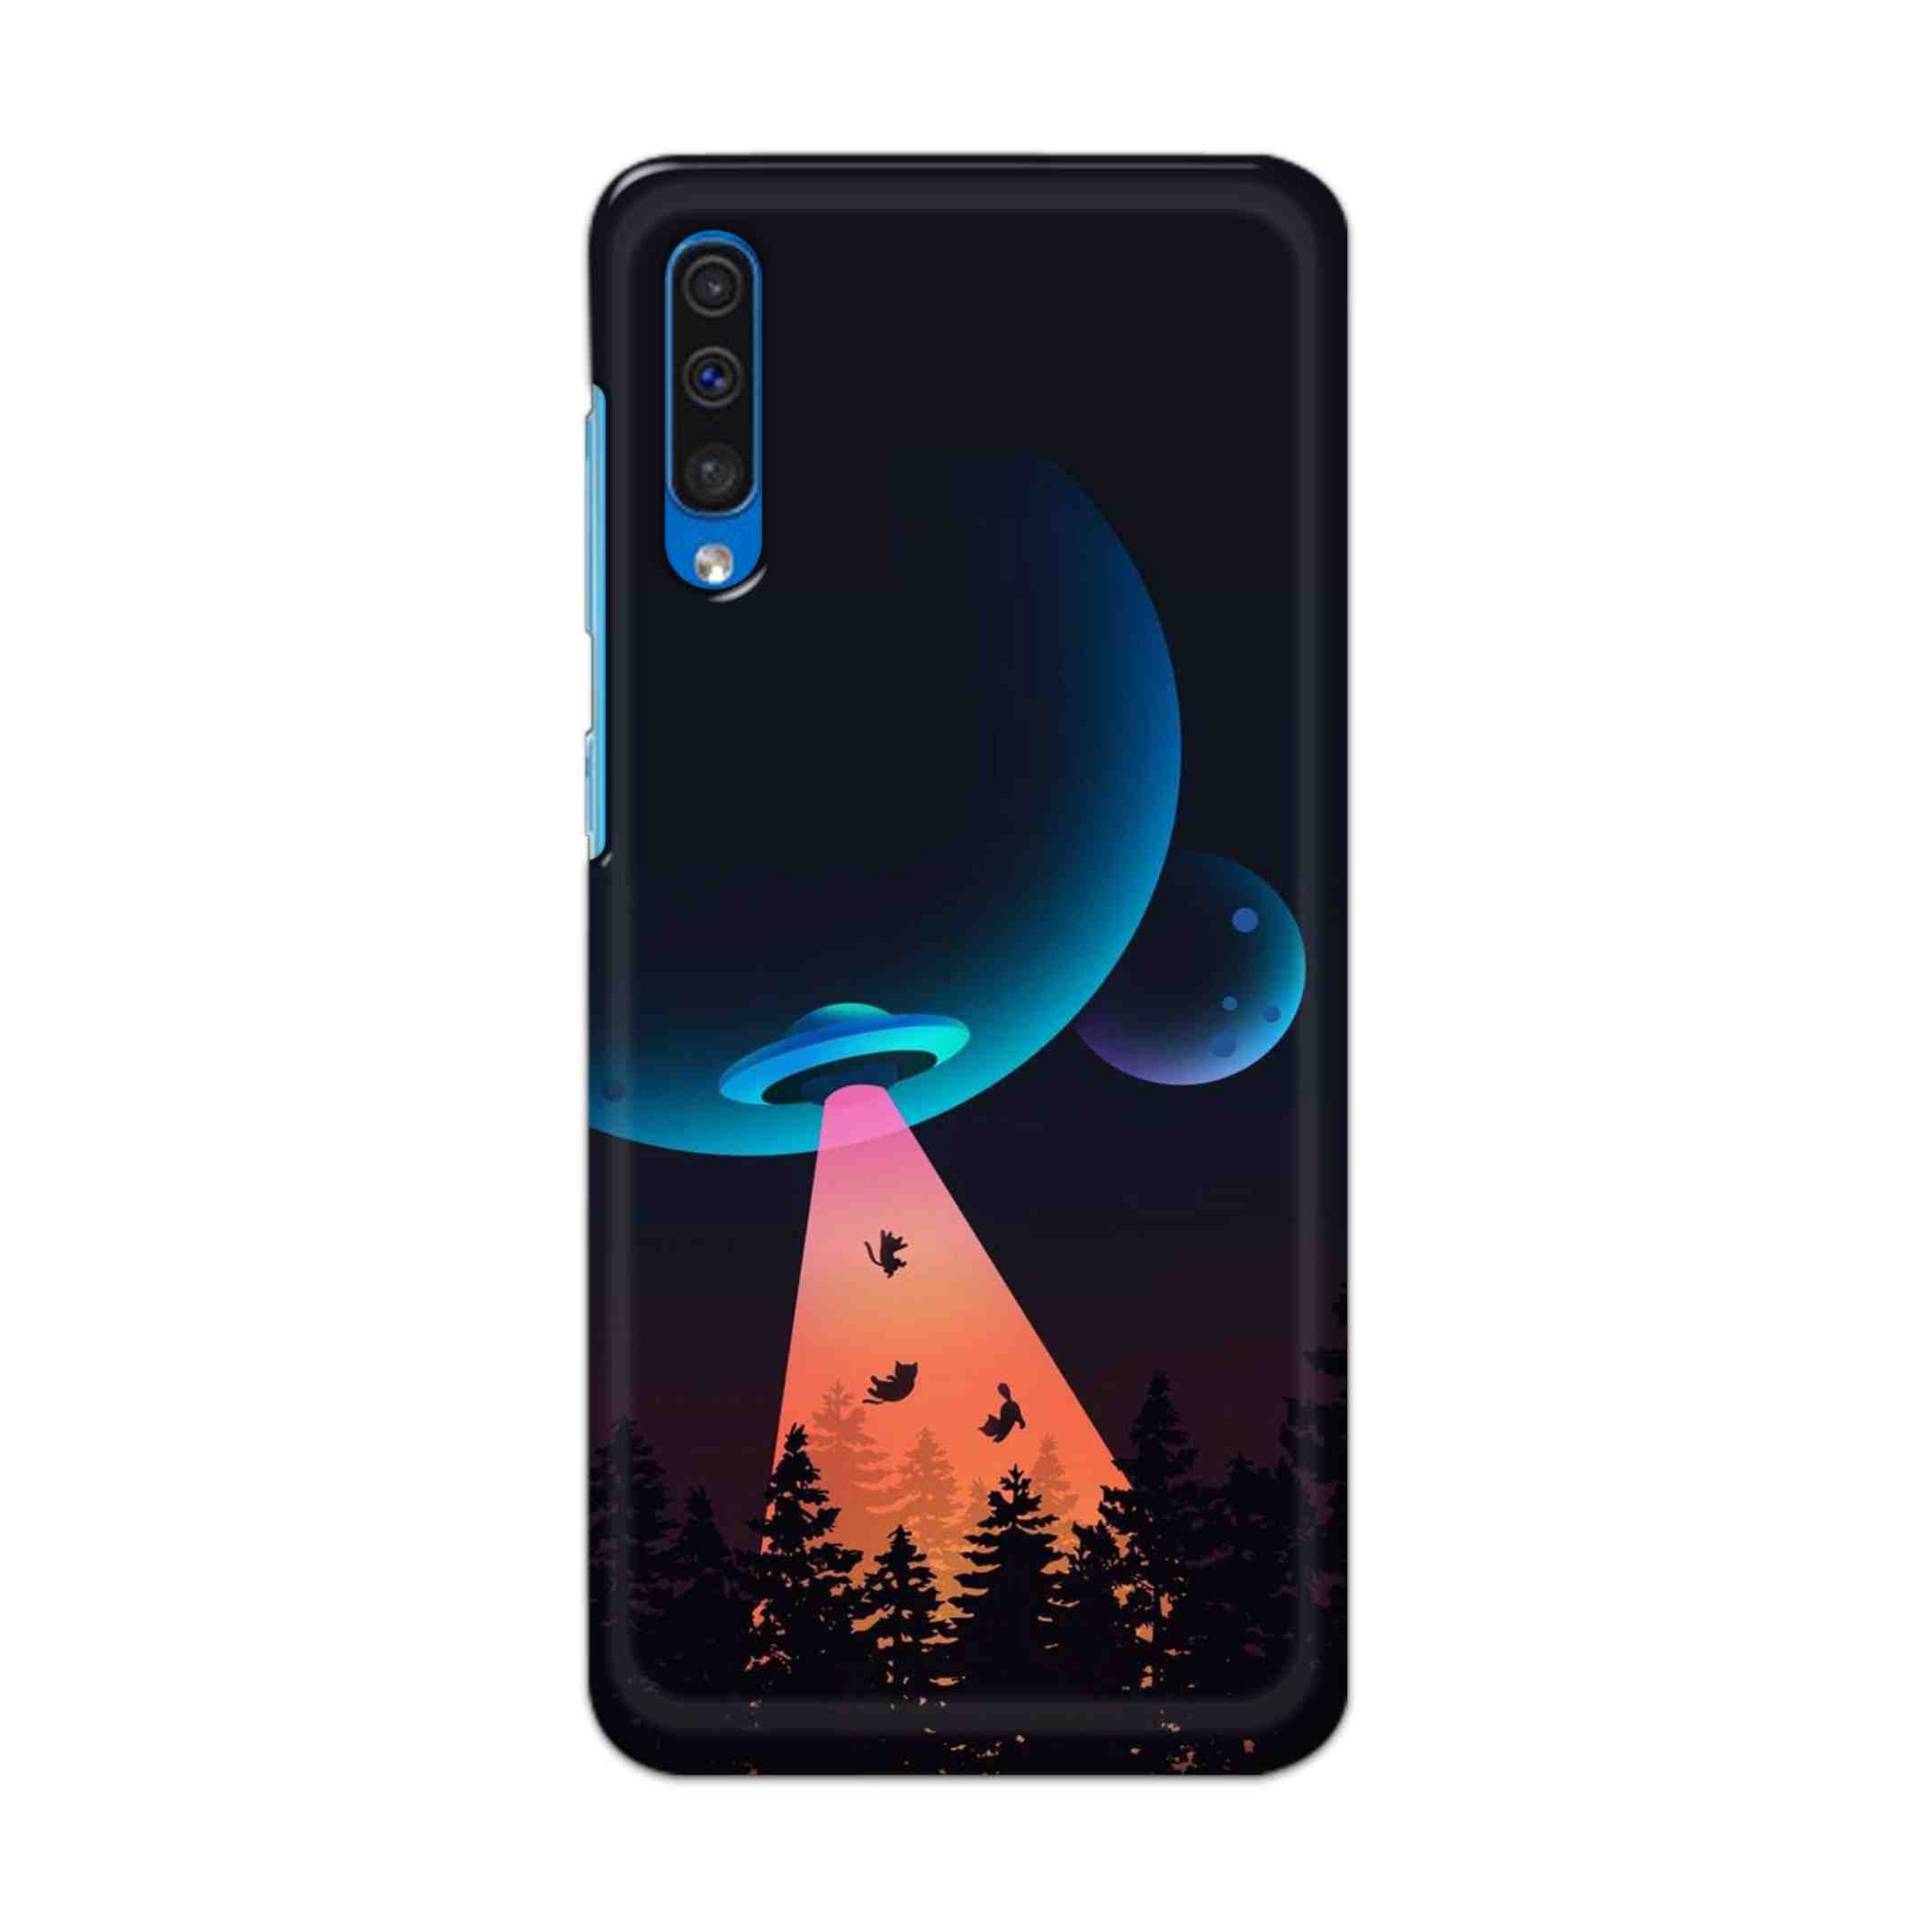 Buy Spaceship Hard Back Mobile Phone Case Cover For Samsung Galaxy A50 / A50s / A30s Online